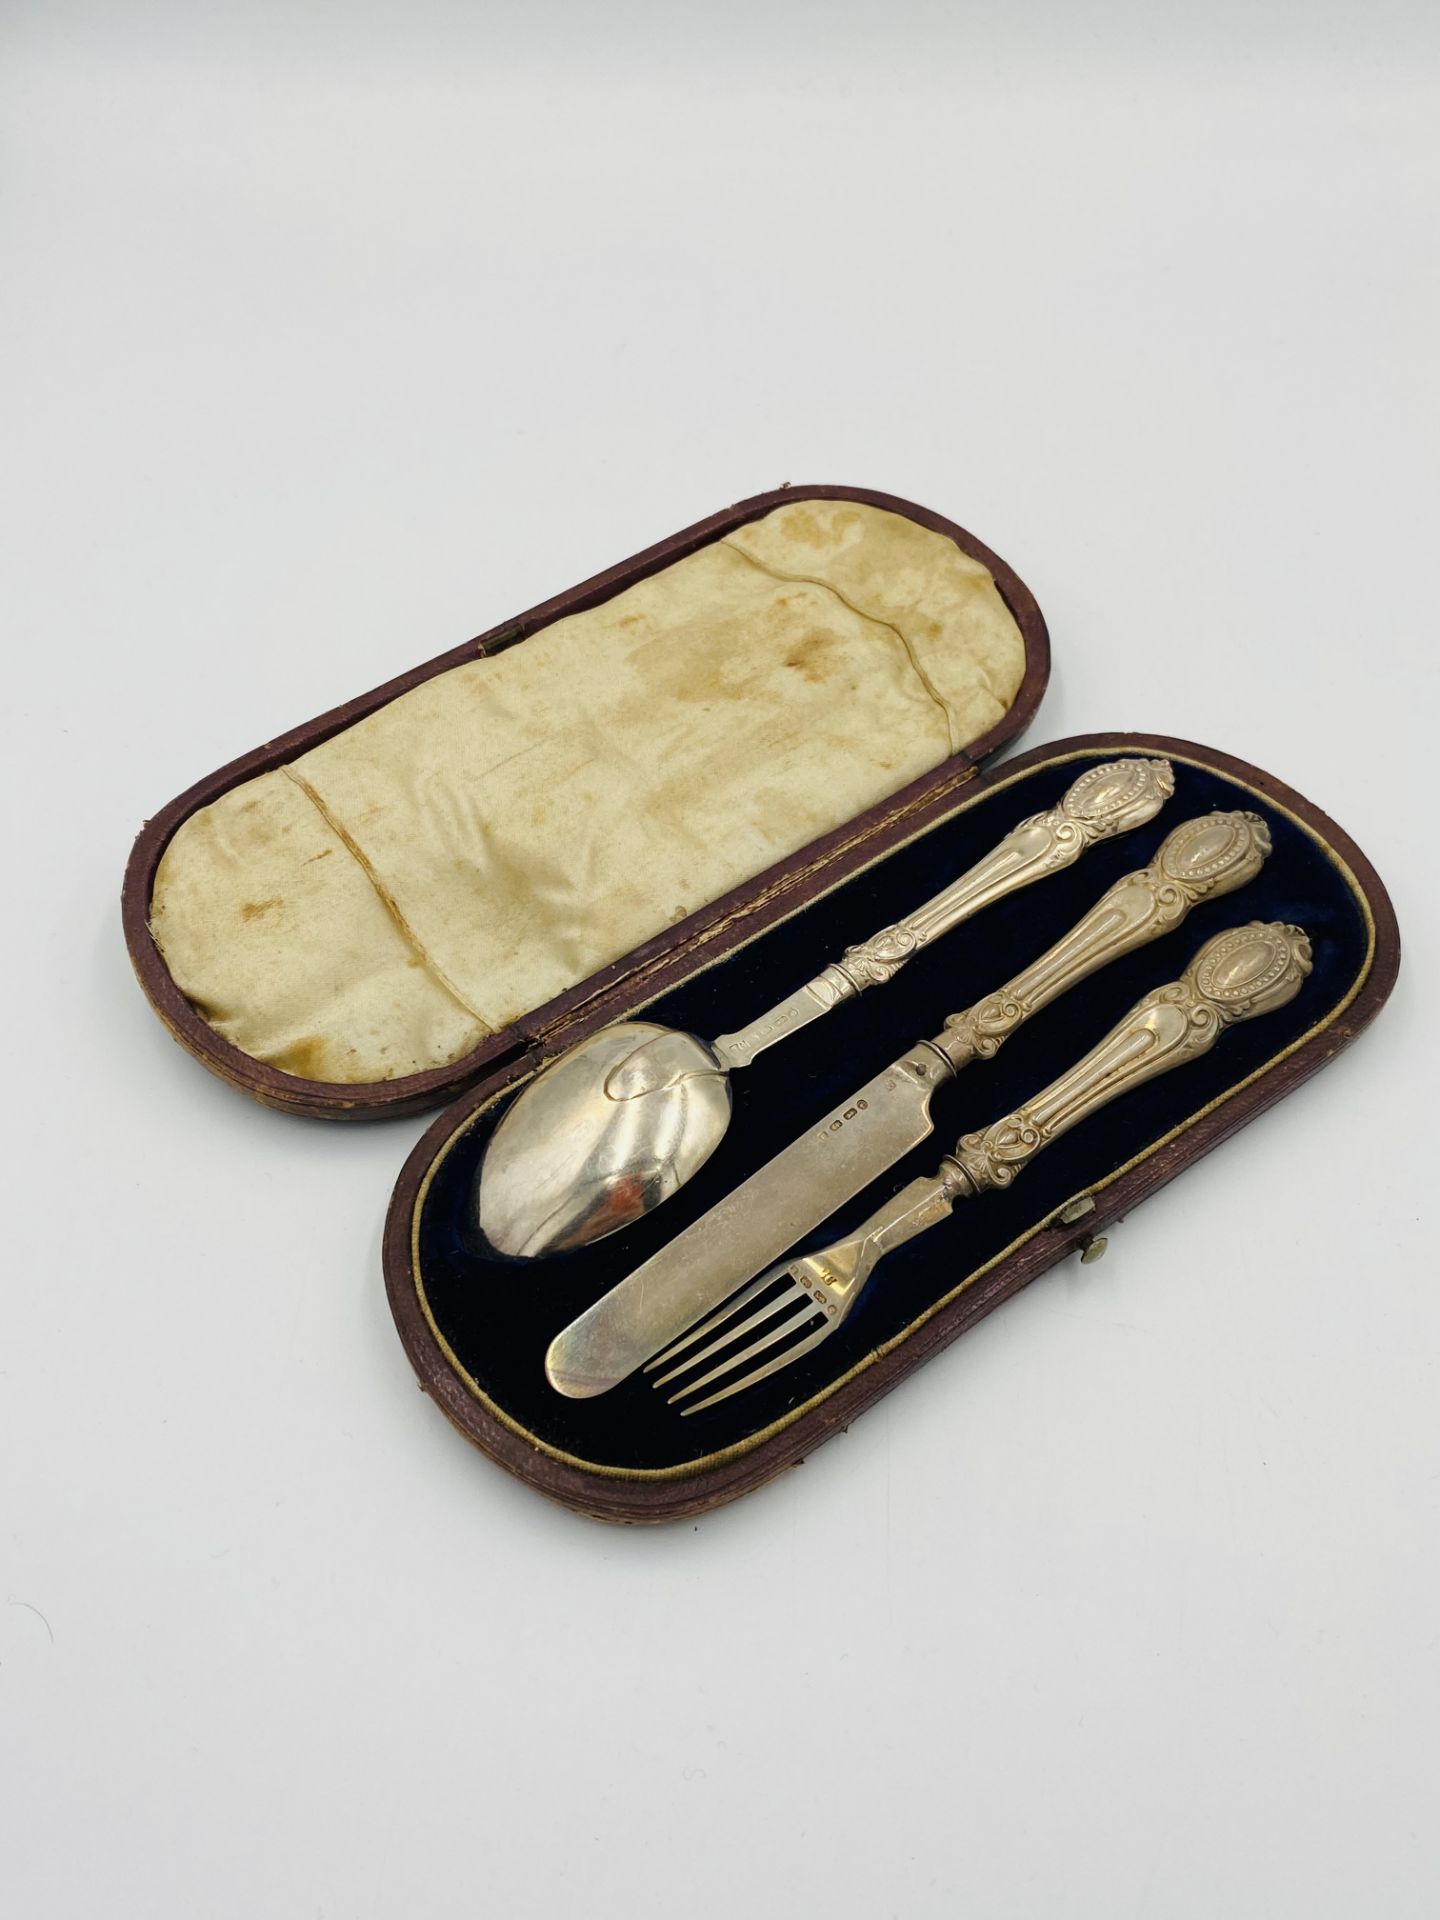 Victorian silver Christening set together with two silver dessert spoons - Image 5 of 5